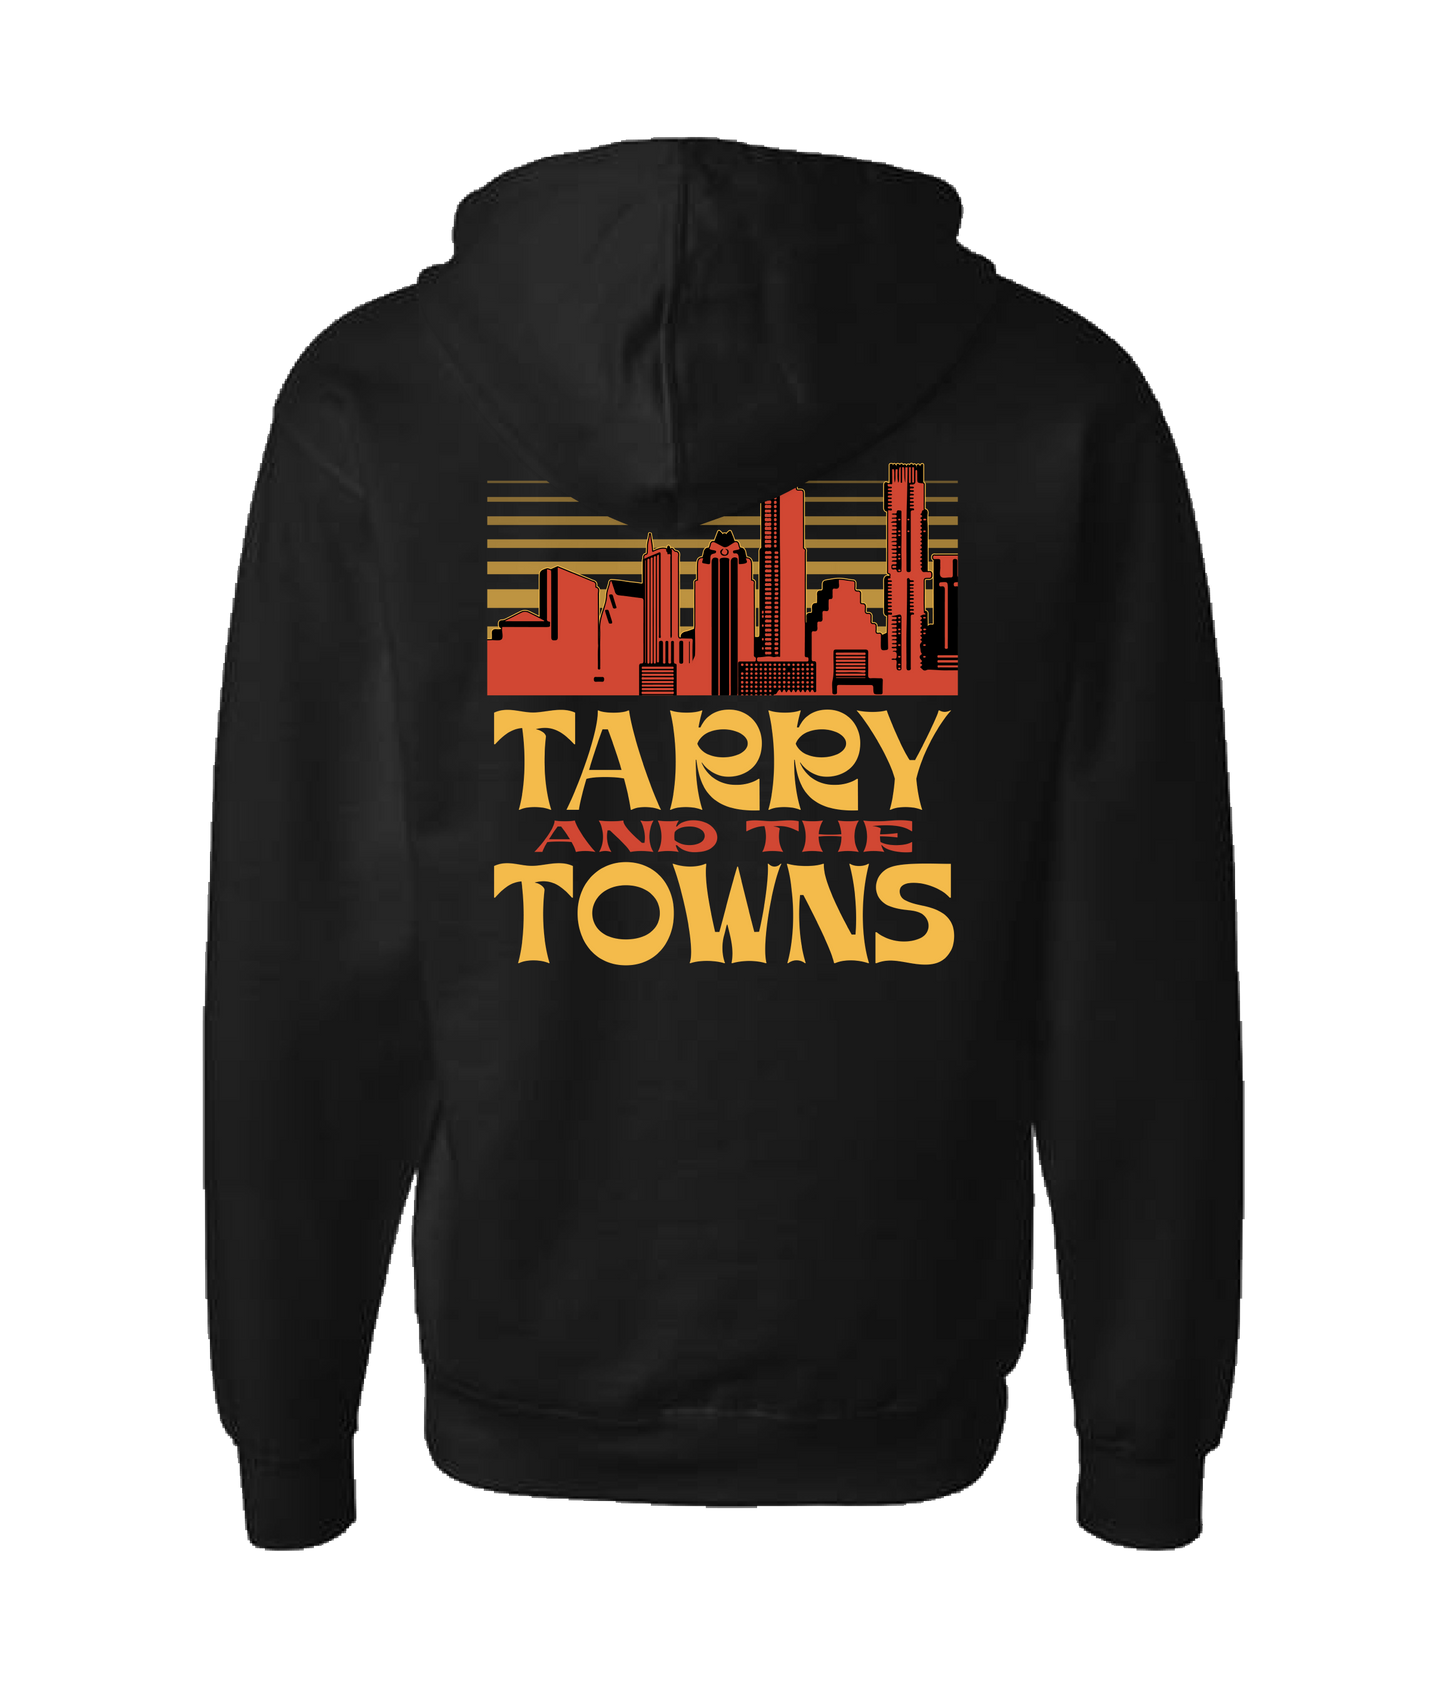 Tarry and the Towns - The 70's - Black Zip Up Hoodie